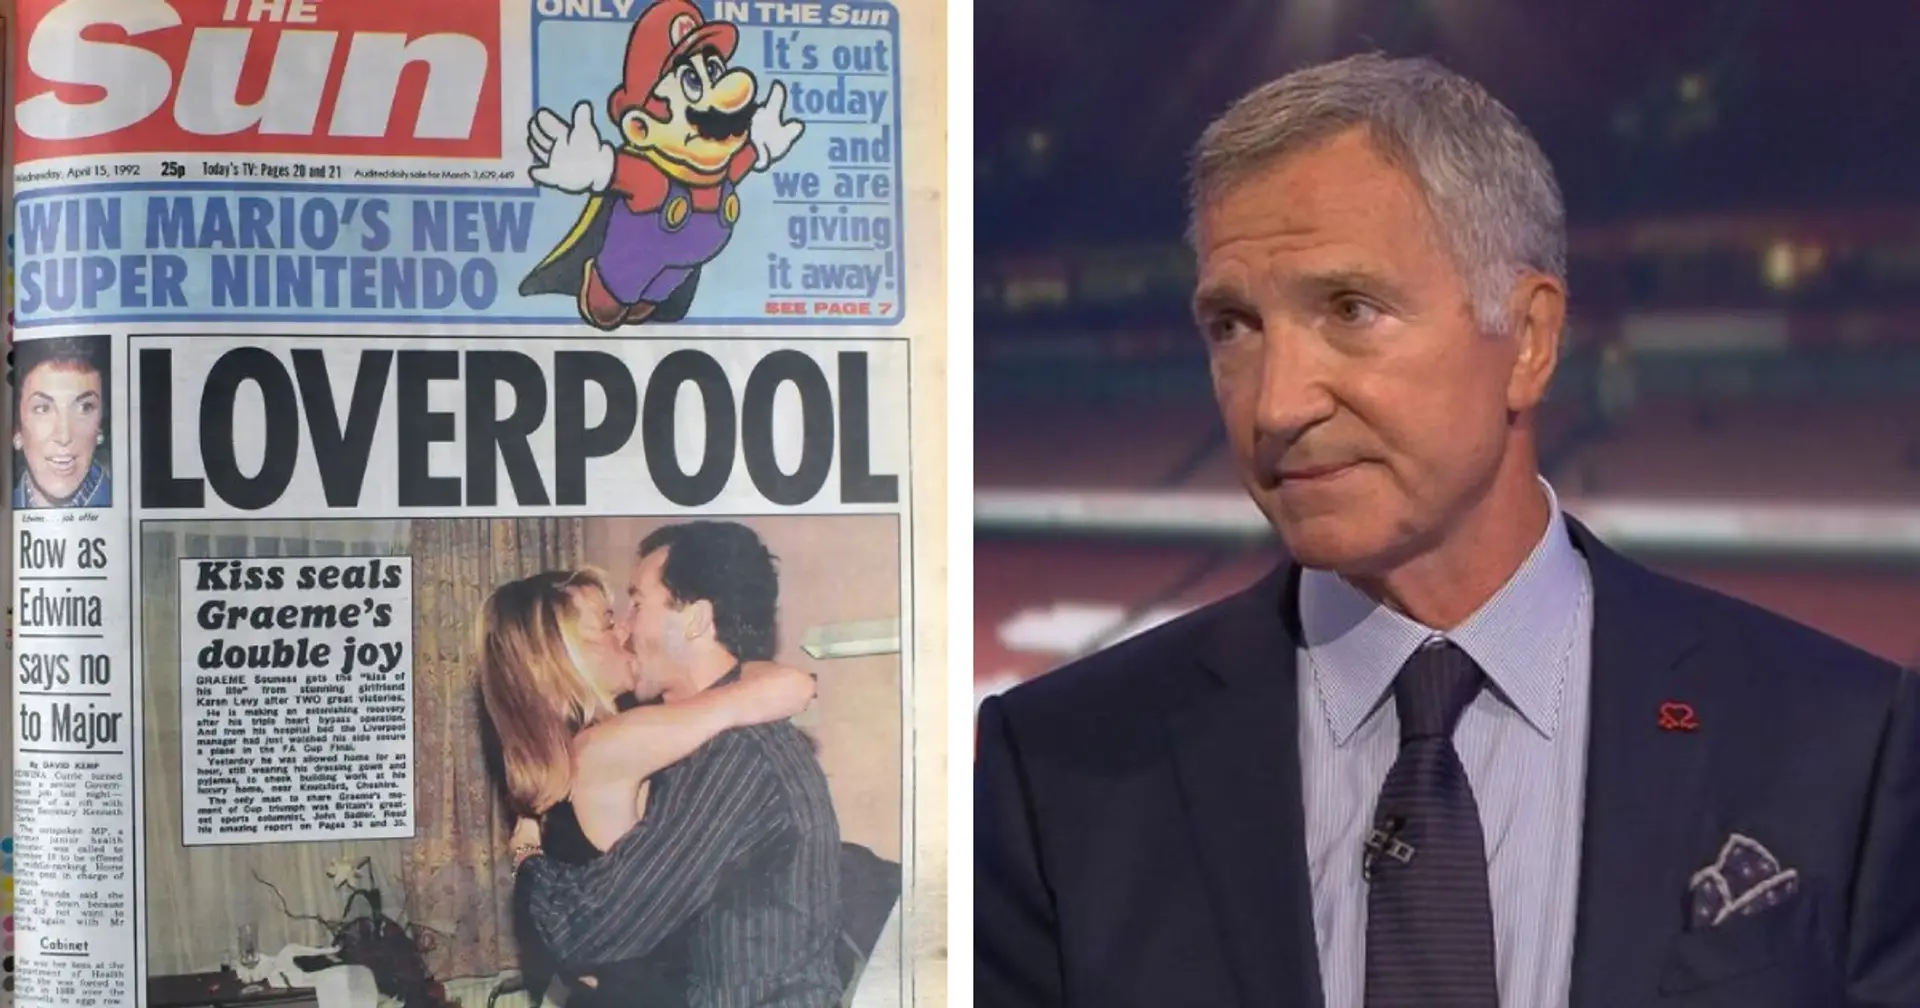 Graeme Souness: 'The Sun interview is the biggest regret of my life'